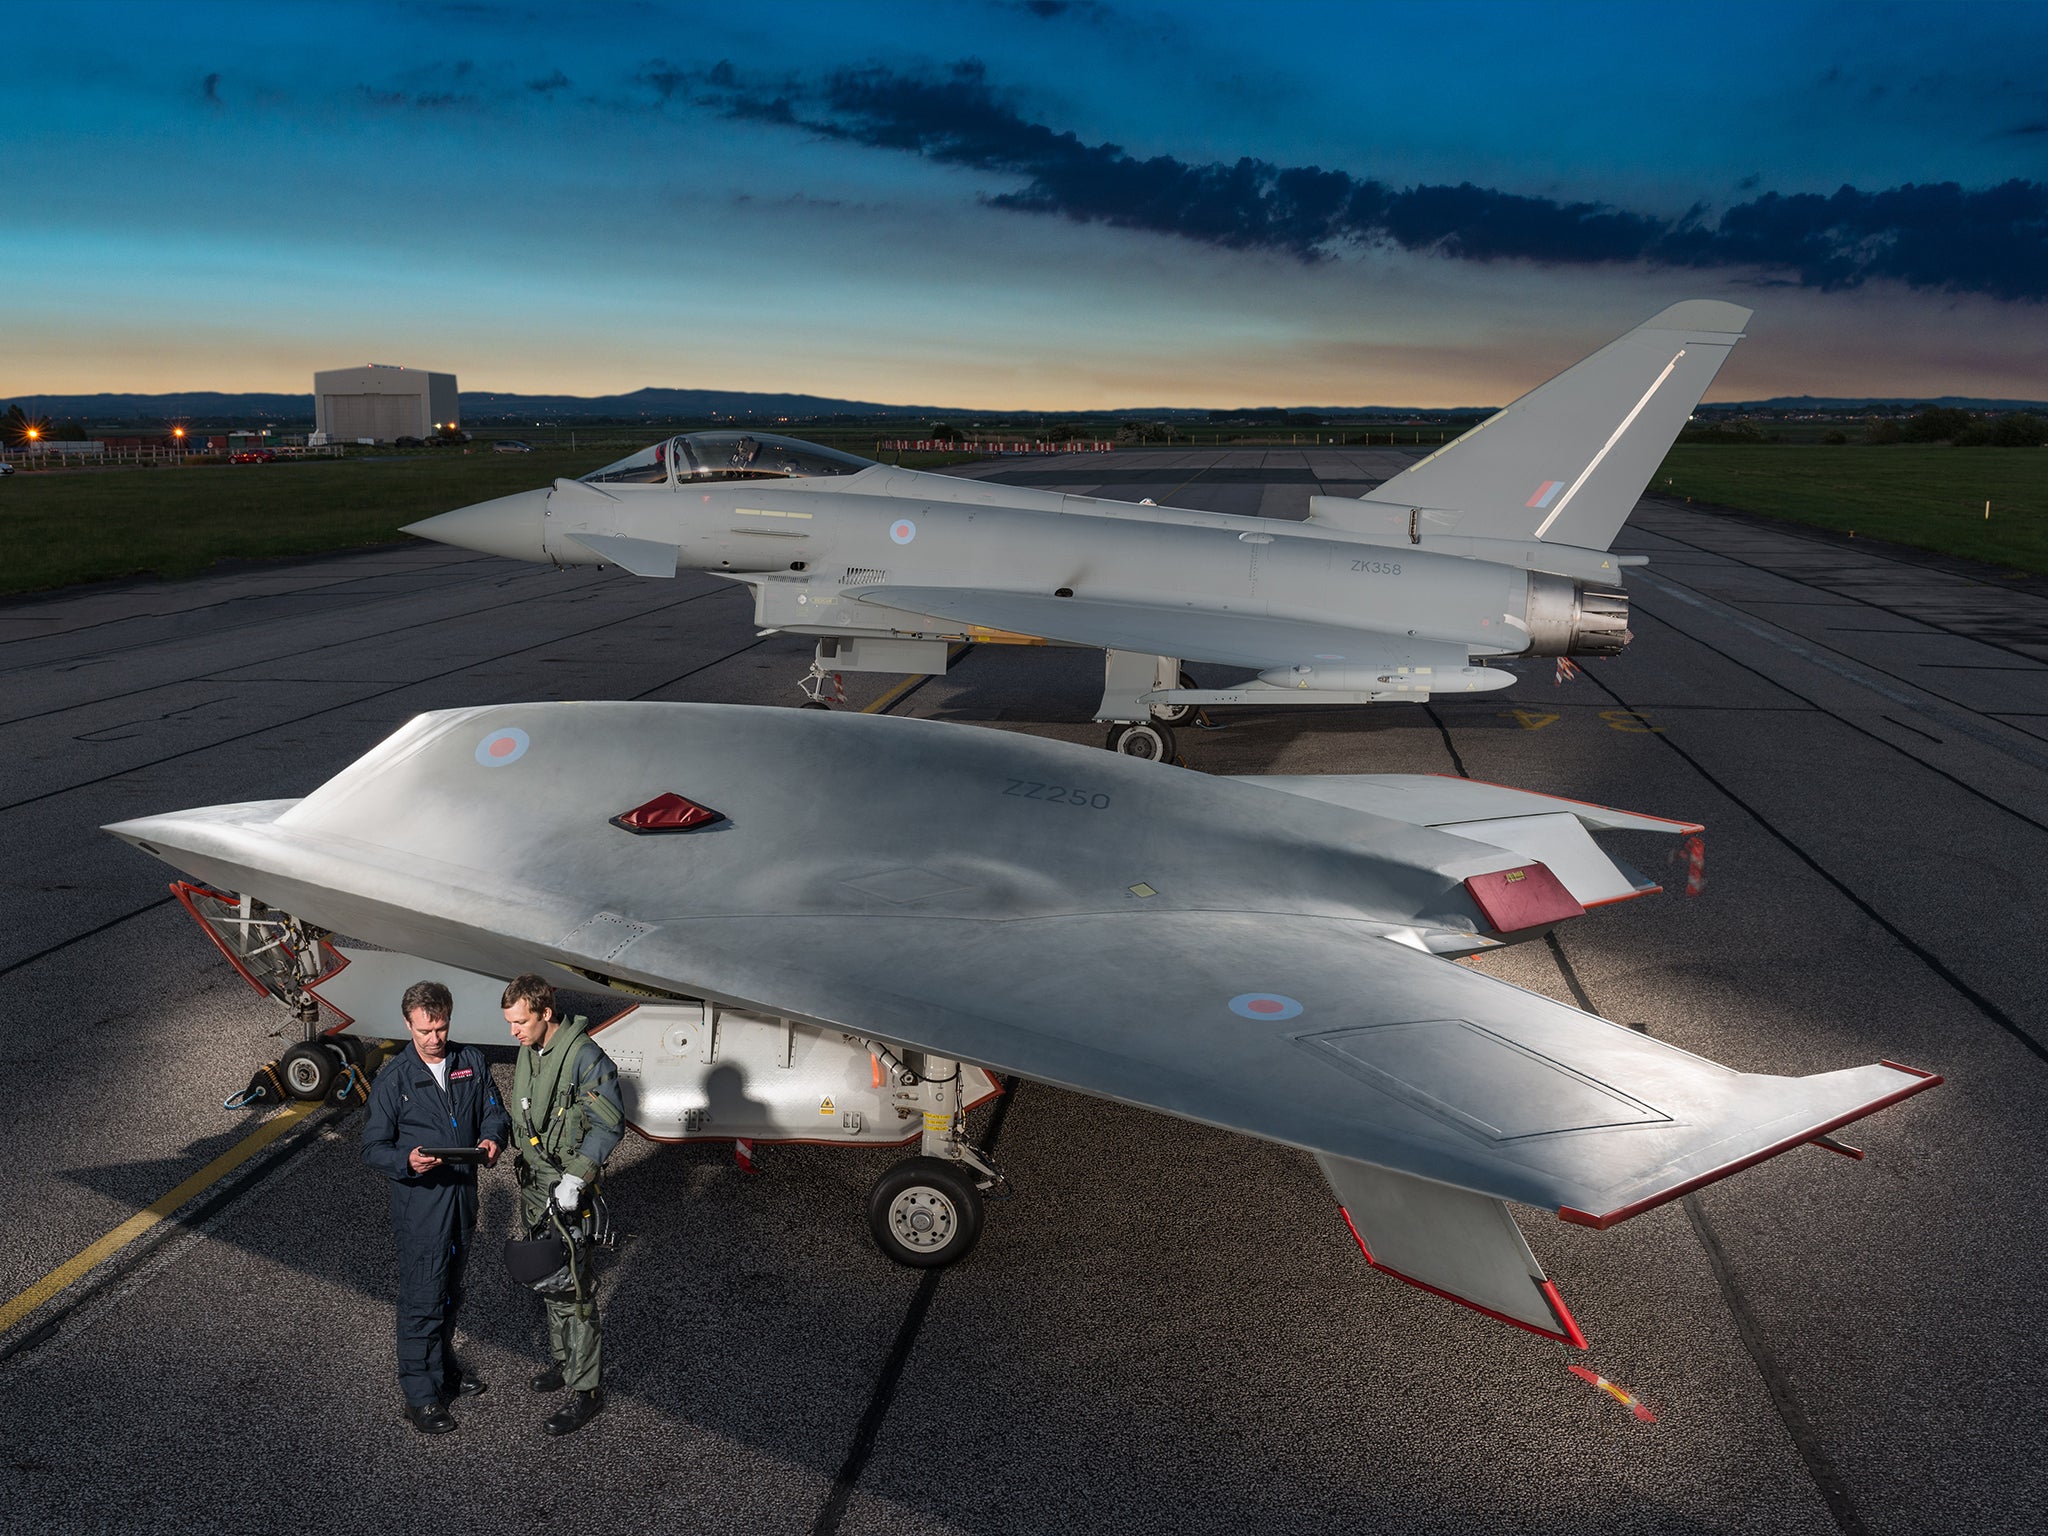 An unmanned Taranis drone (nicknamed Raptor) in front of a piloted fighter jet